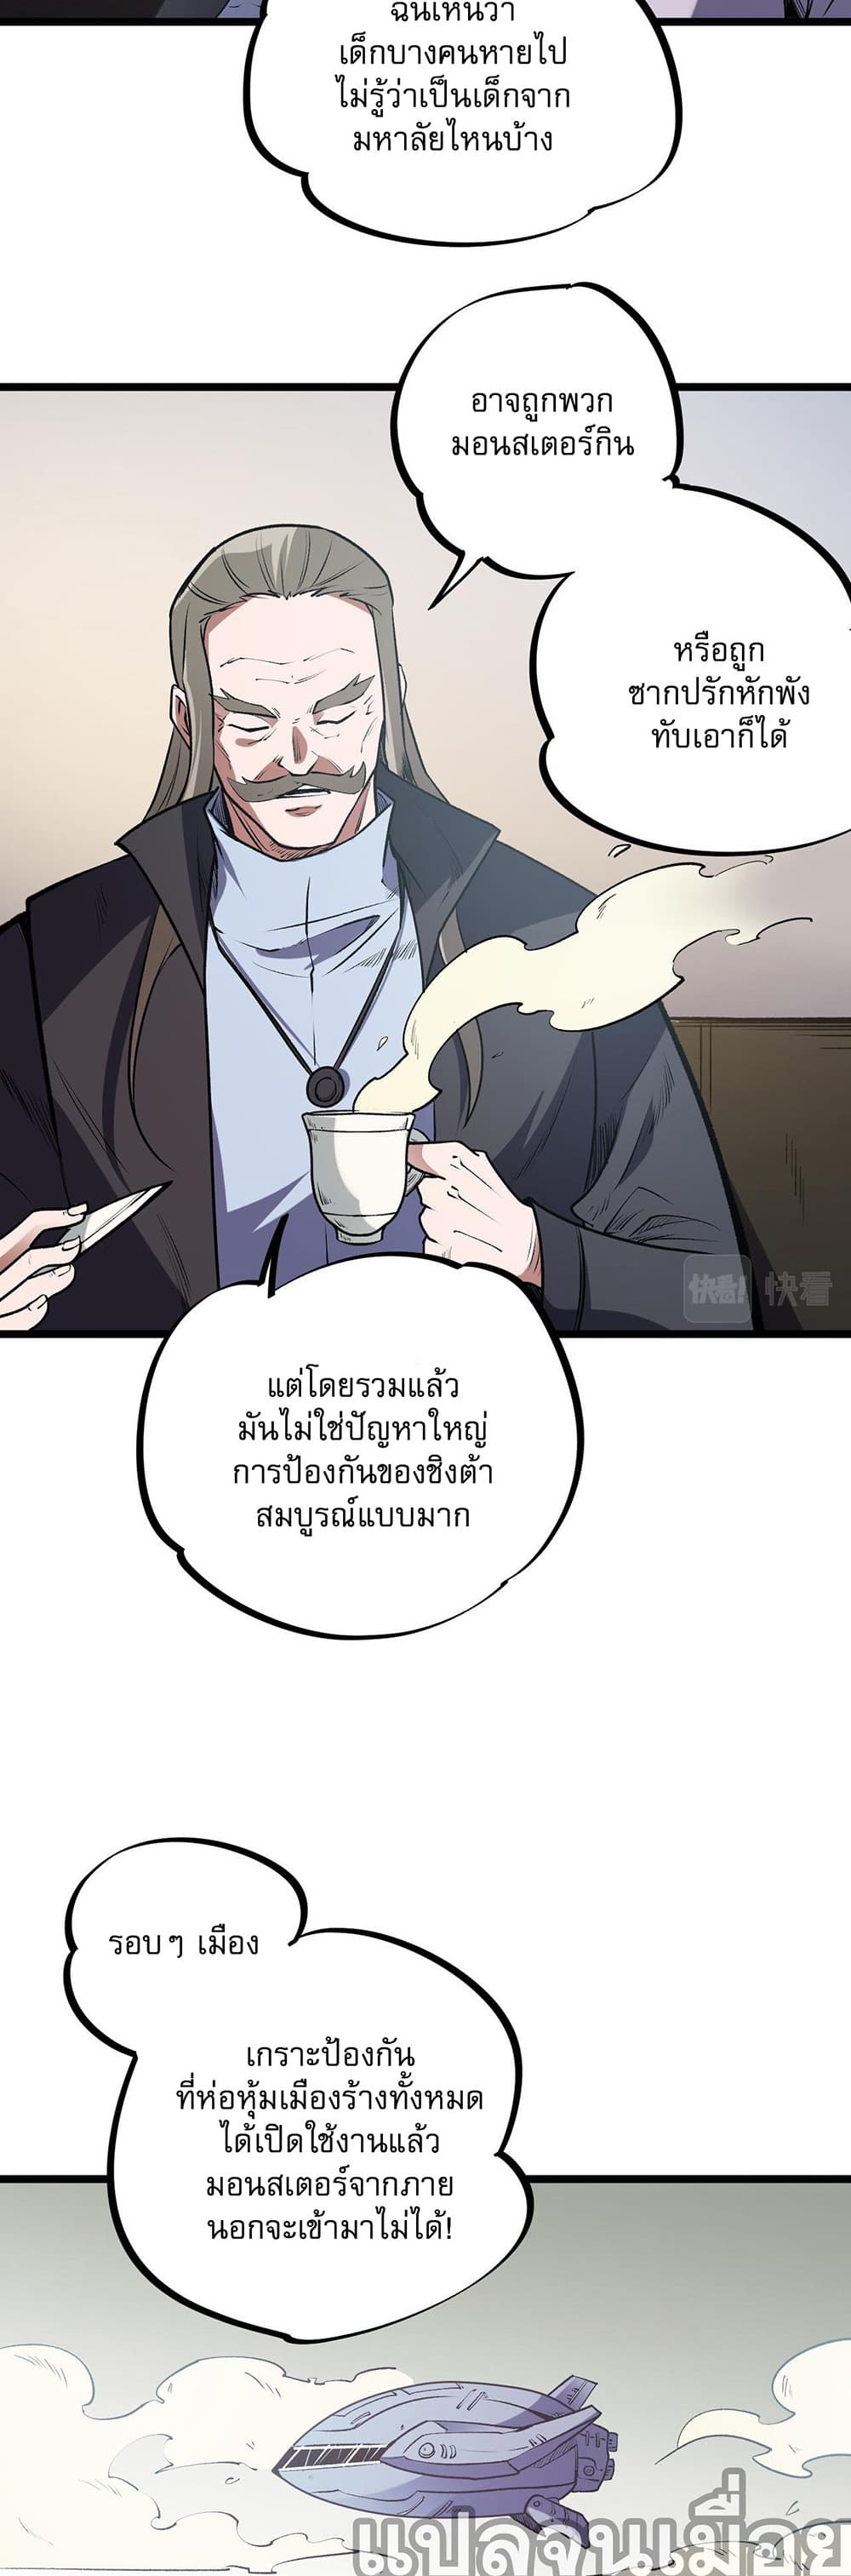 Job Changing for the Entire Population: The Jobless Me Will Terminate the Gods ฉันคือผู้เล่นไร้อาชีพที่สังหารเหล่าเทพ 40-40